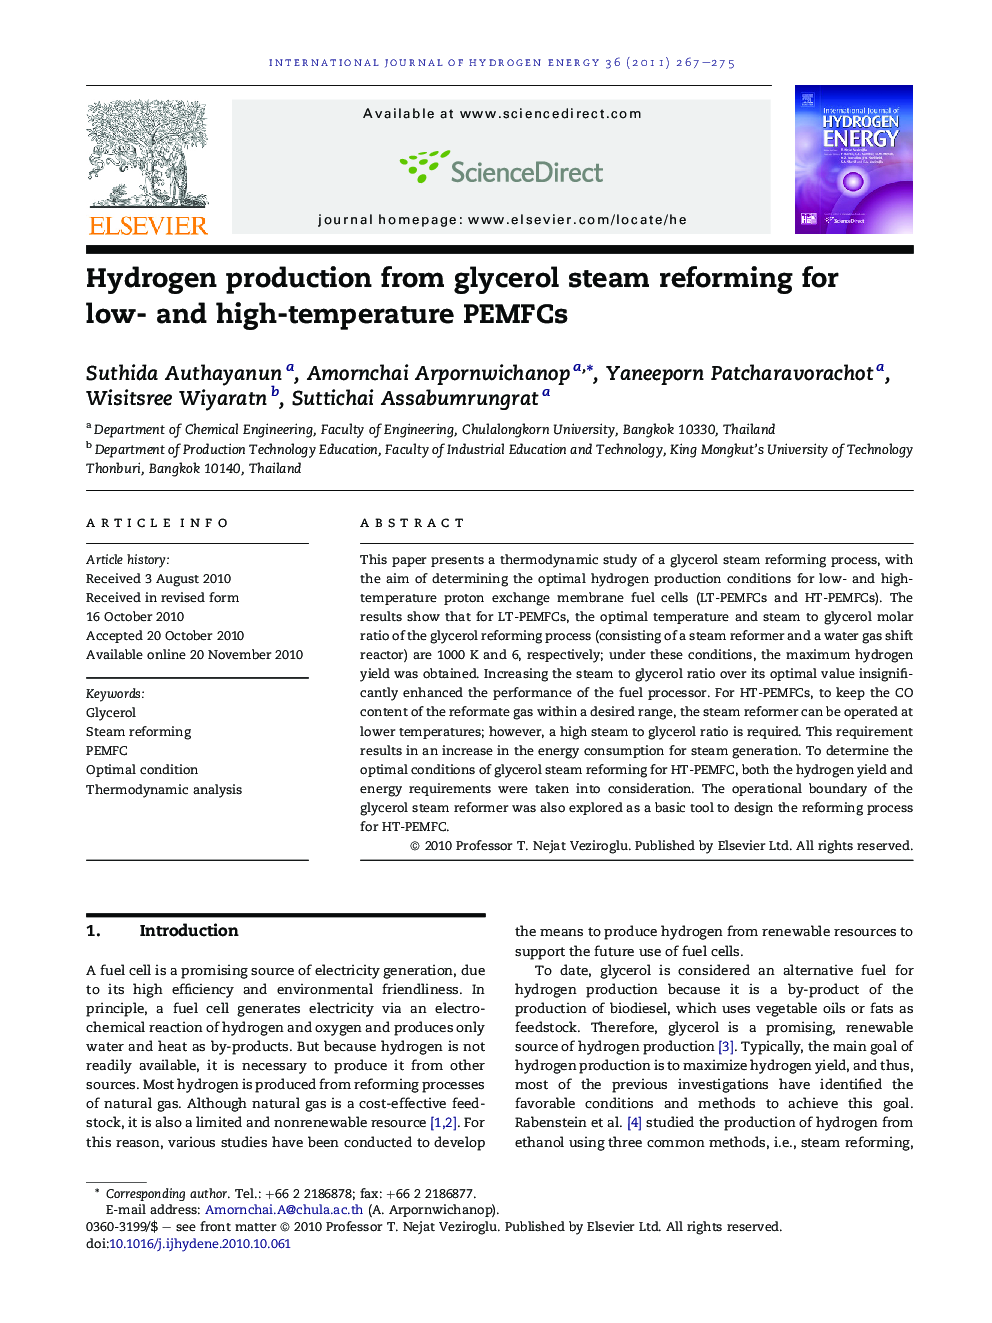 Hydrogen production from glycerol steam reforming for low- and high-temperature PEMFCs